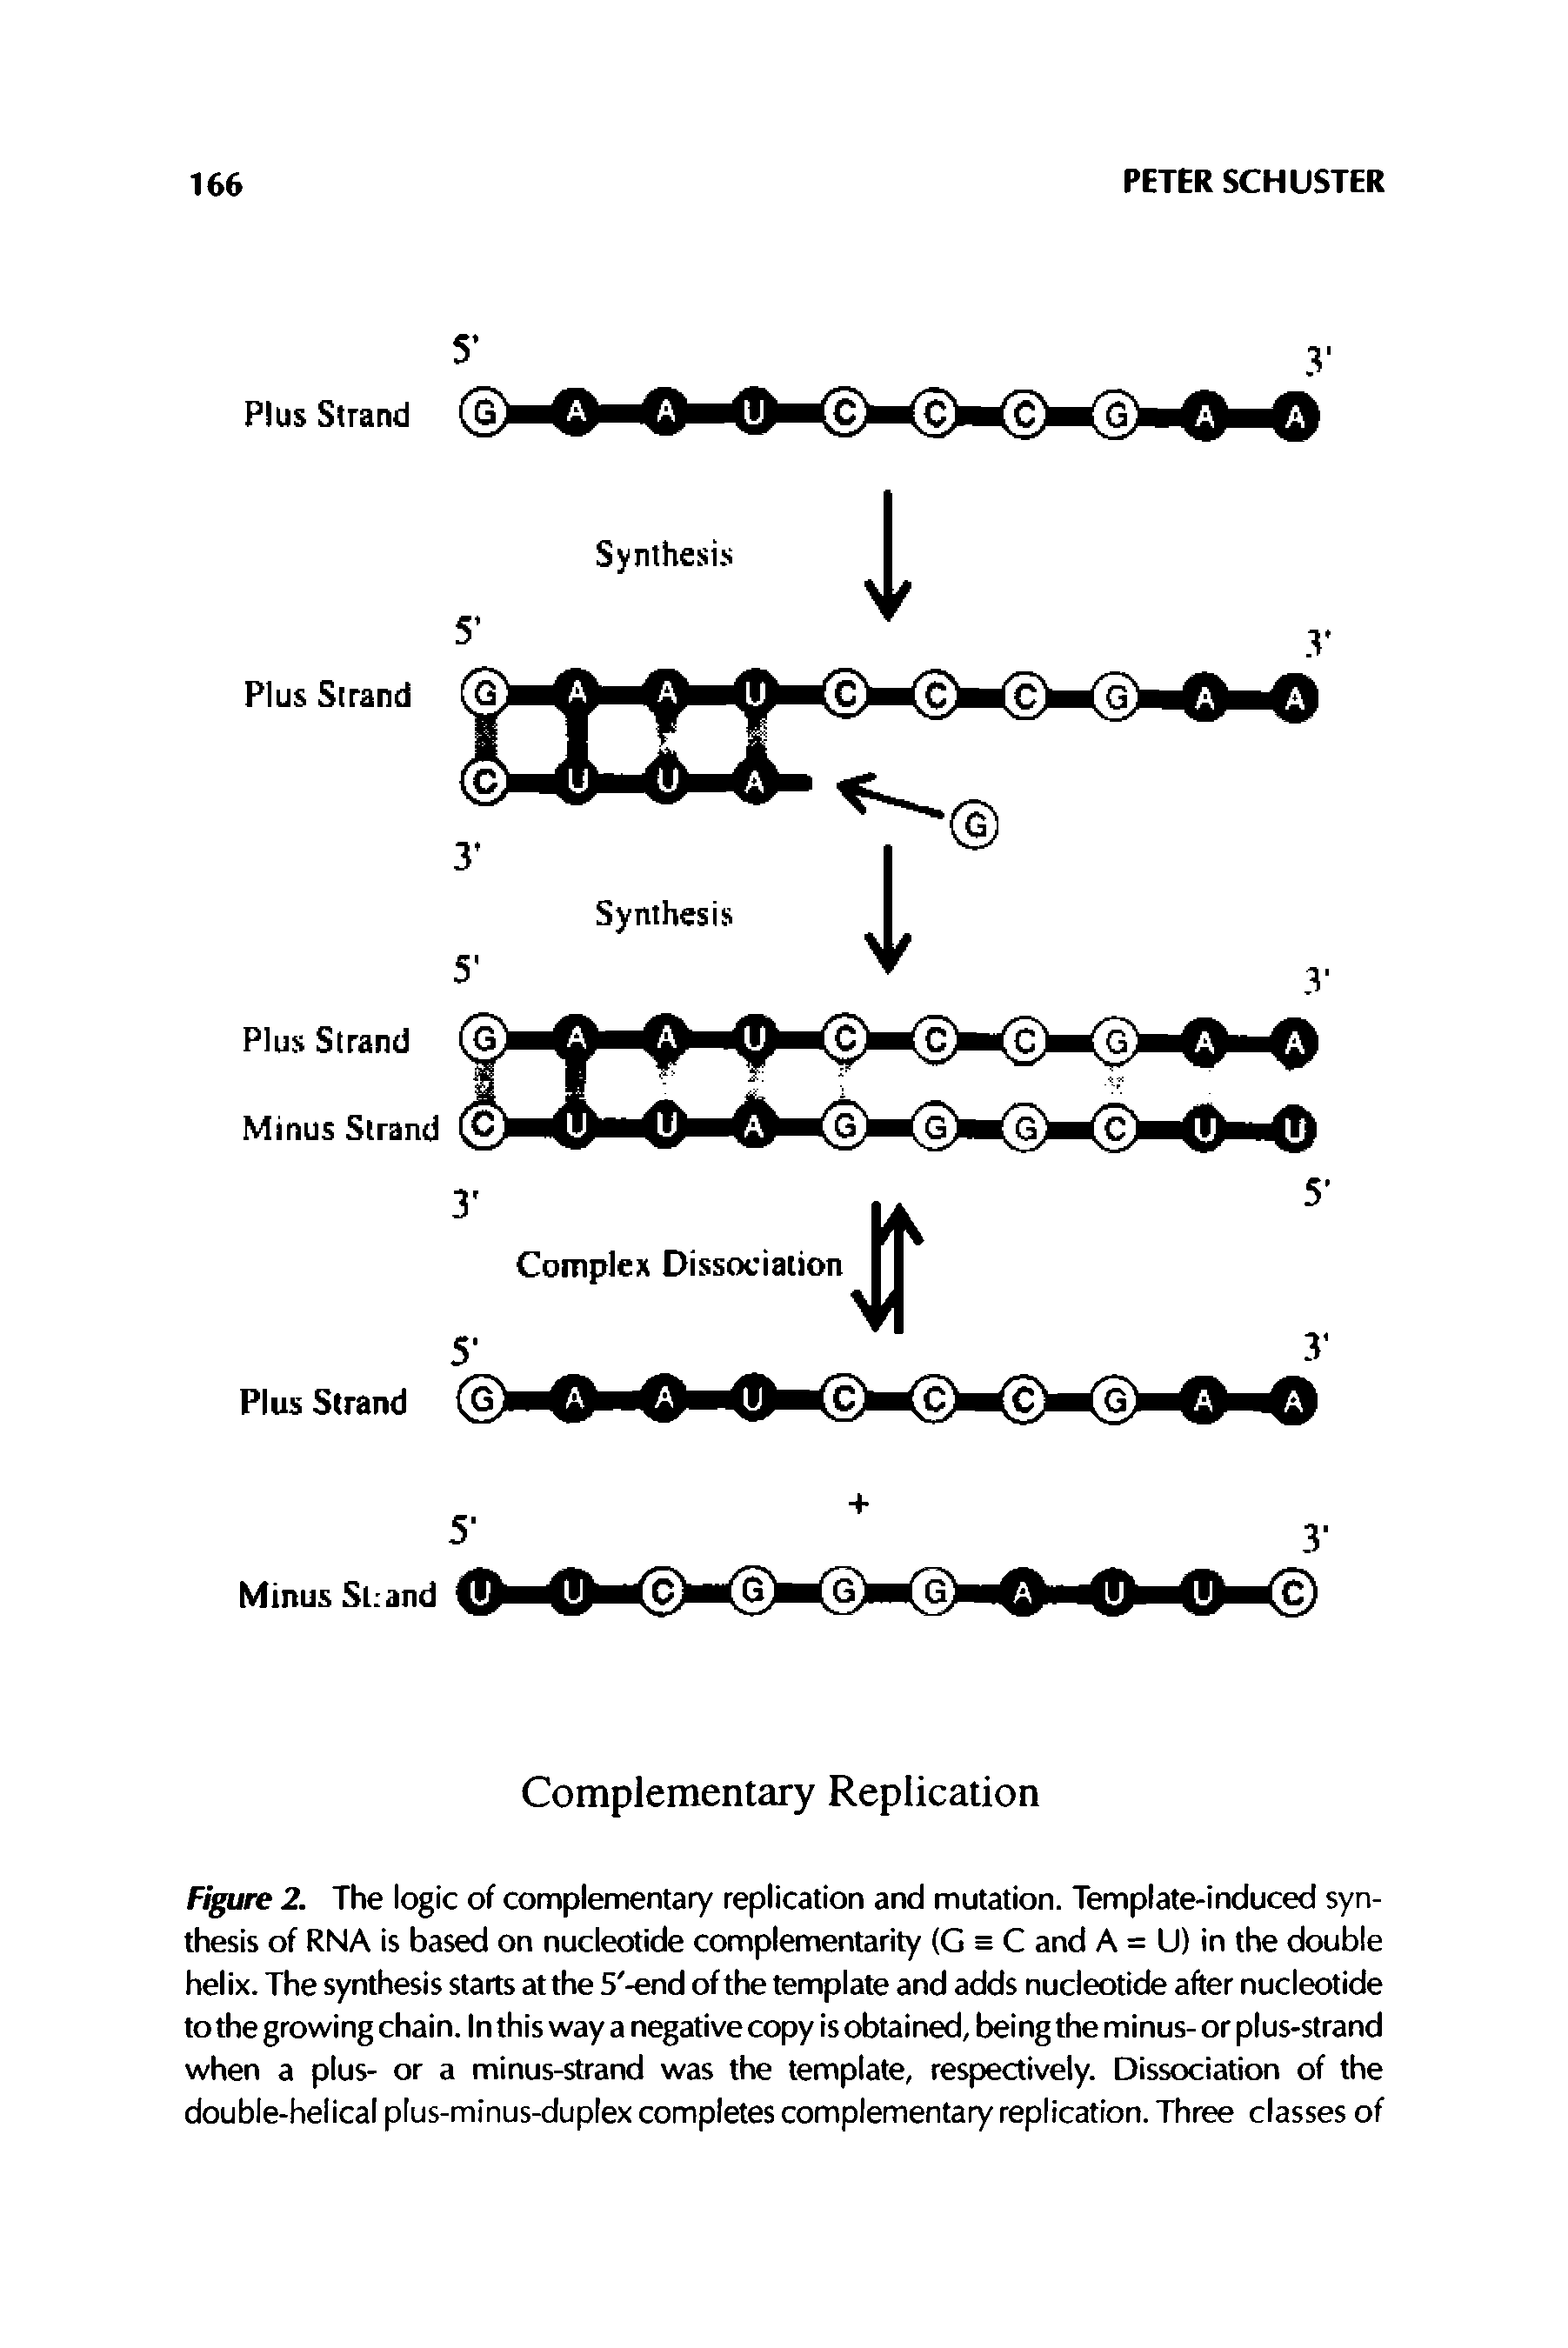 Figure 2. The logic of complementary replication and mutation. Template-induced synthesis of RNA is based on nucleotide complementarity (G h C and A = U) in the double helix. The synthesis starts at the 5 -end of the template and adds nucleotide after nucleotide to the growing chain. In this way a negative copy is obtained, being the minus- or plus-strand when a plus- or a minus-strand was the template, respectively. Dissociation of the double-helical plus-minus-duplex completes complementary replication. Three classes of...